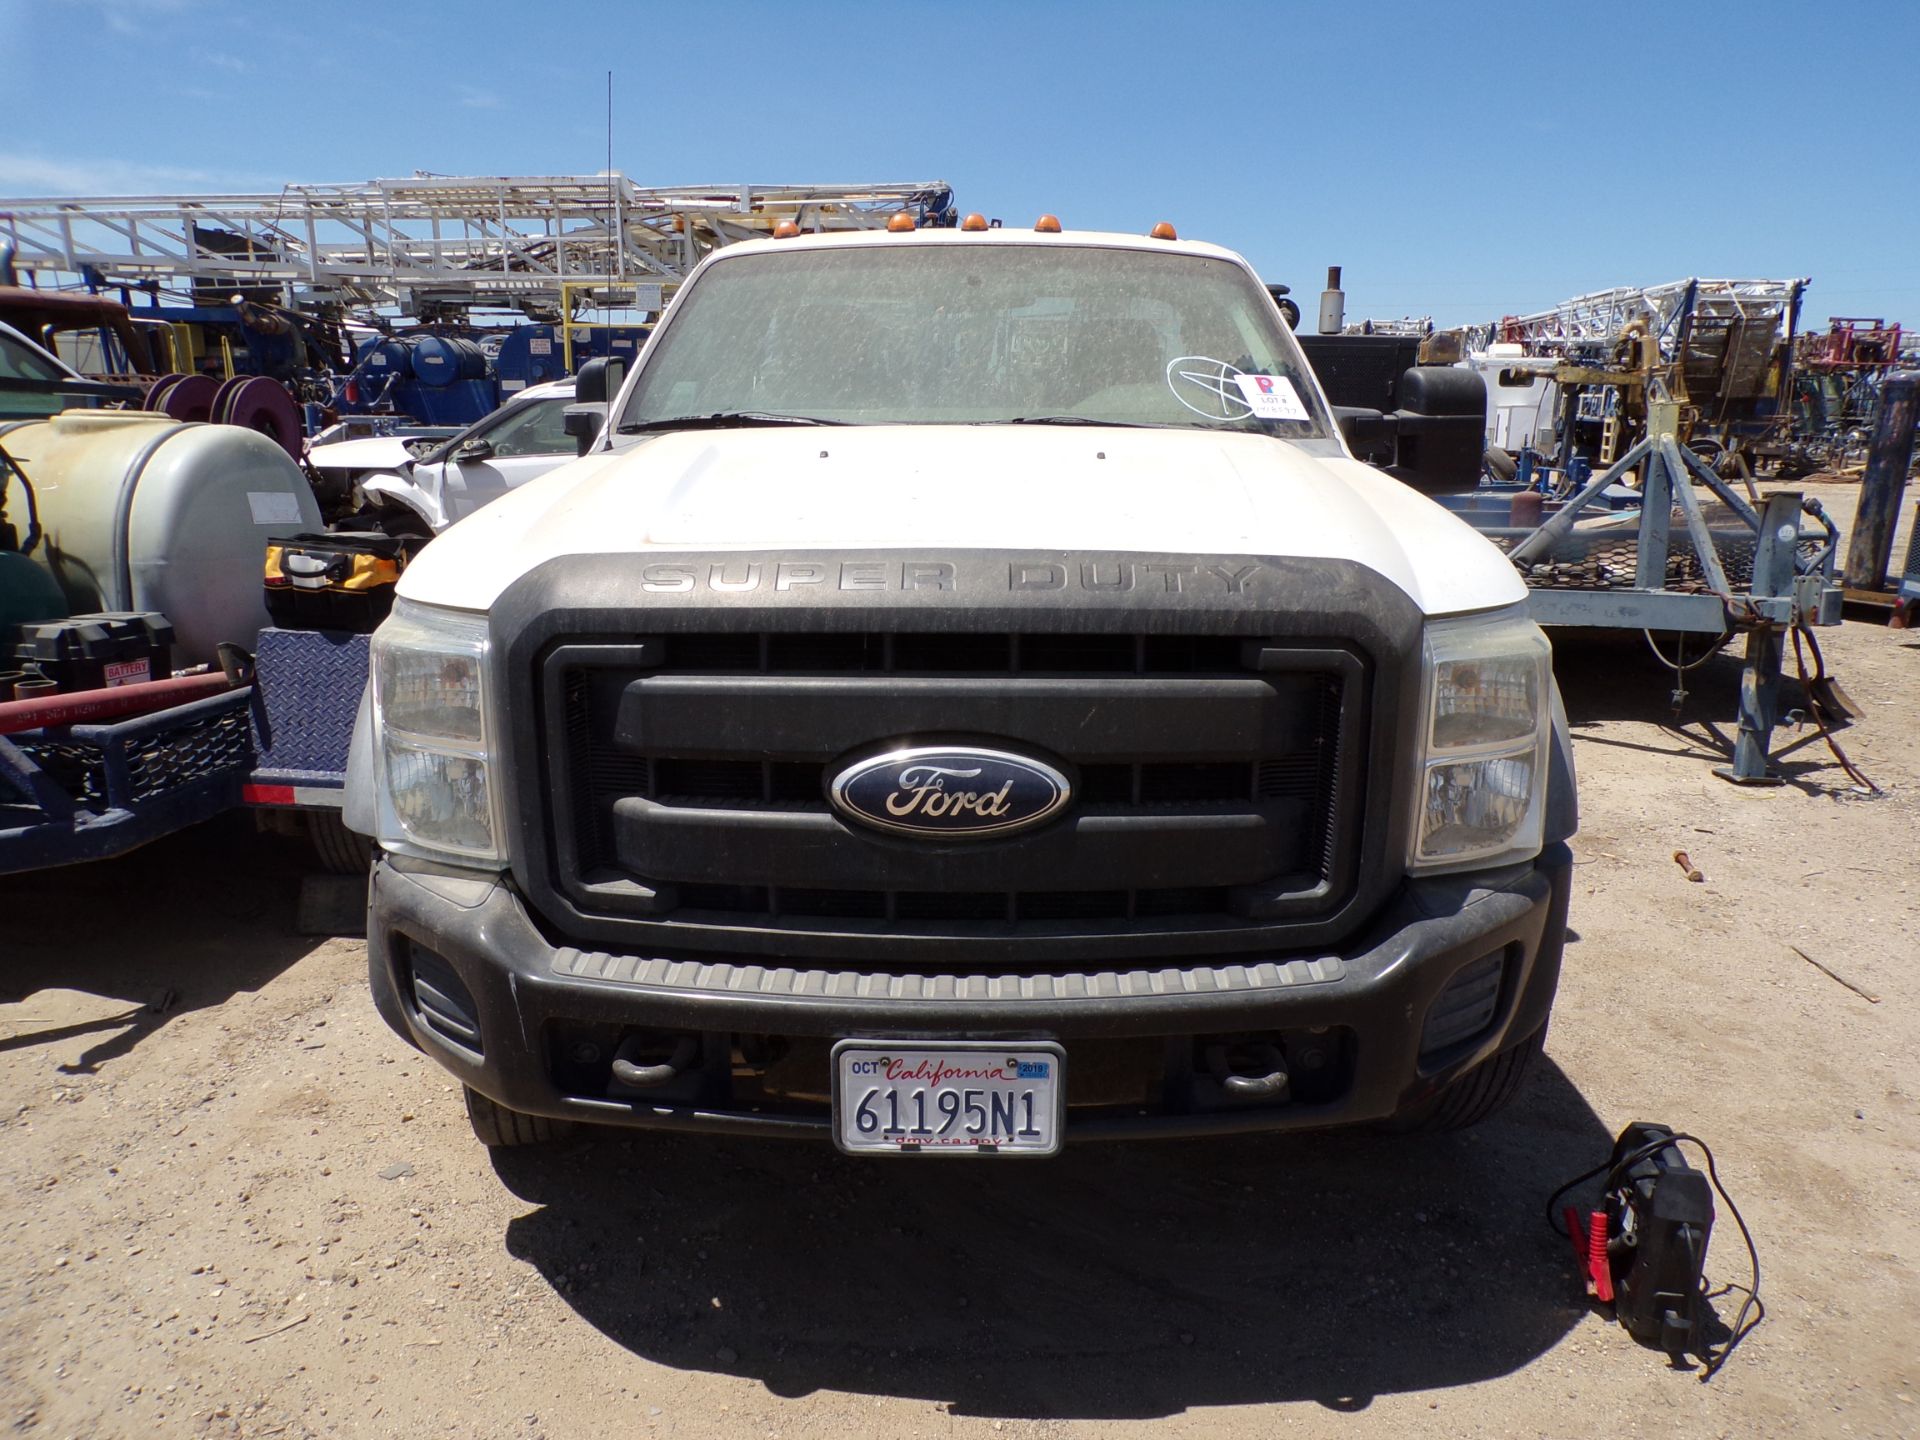 Located in YARD 14 - Bakersfield, CA (1418597) (X) 2012 FORD F450 3X4 STANDARD CAB PICKUP, VIN- - Image 3 of 6